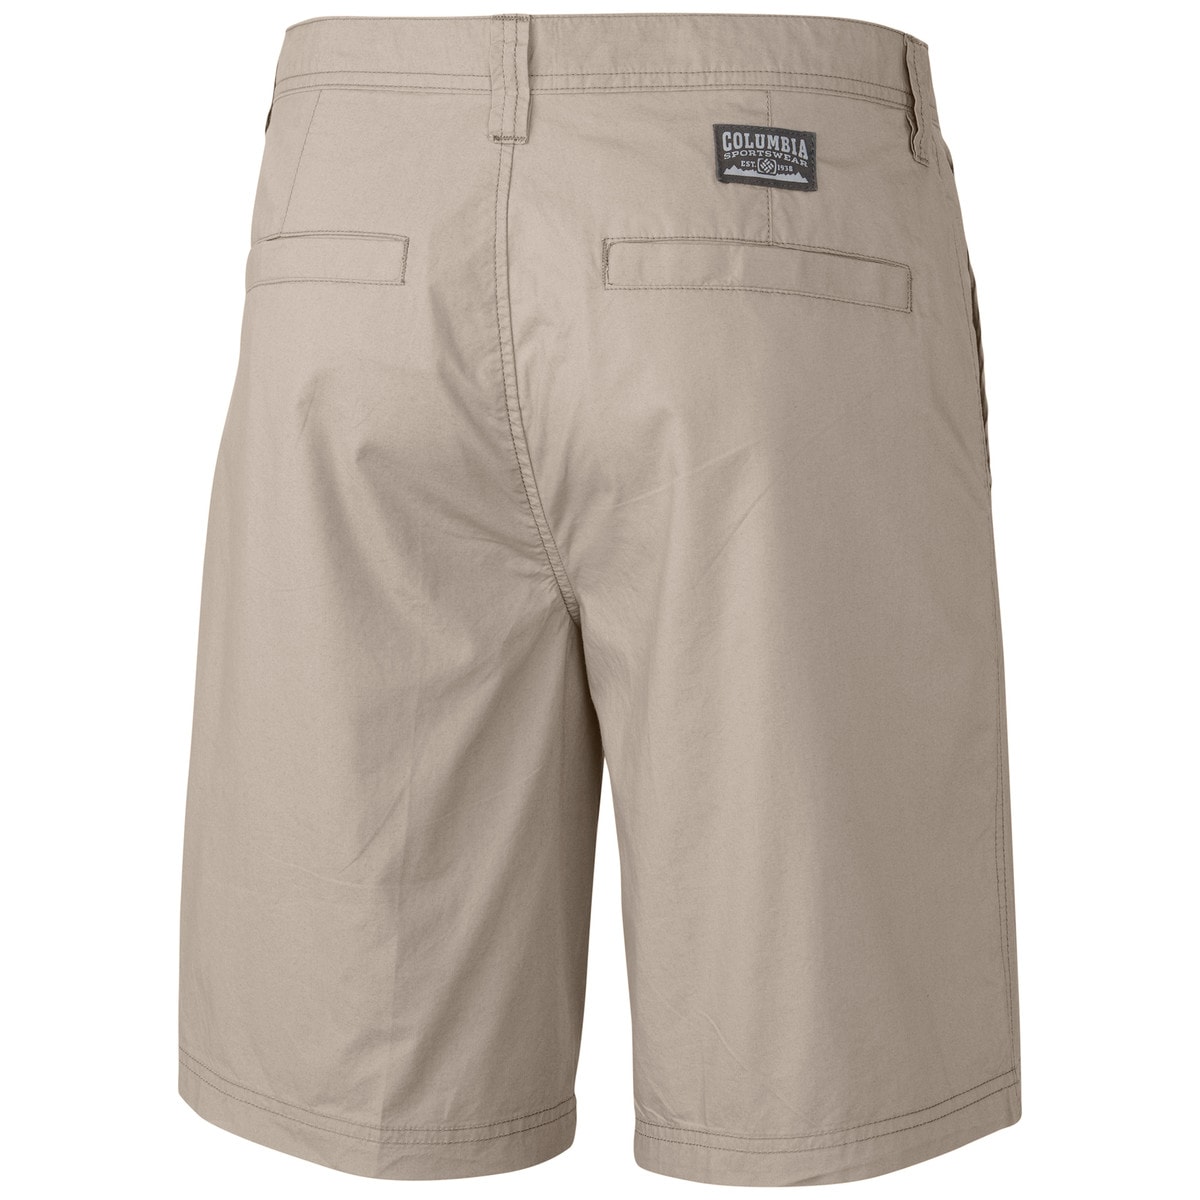 Columbia Washed Out Short - Men's | Backcountry.com